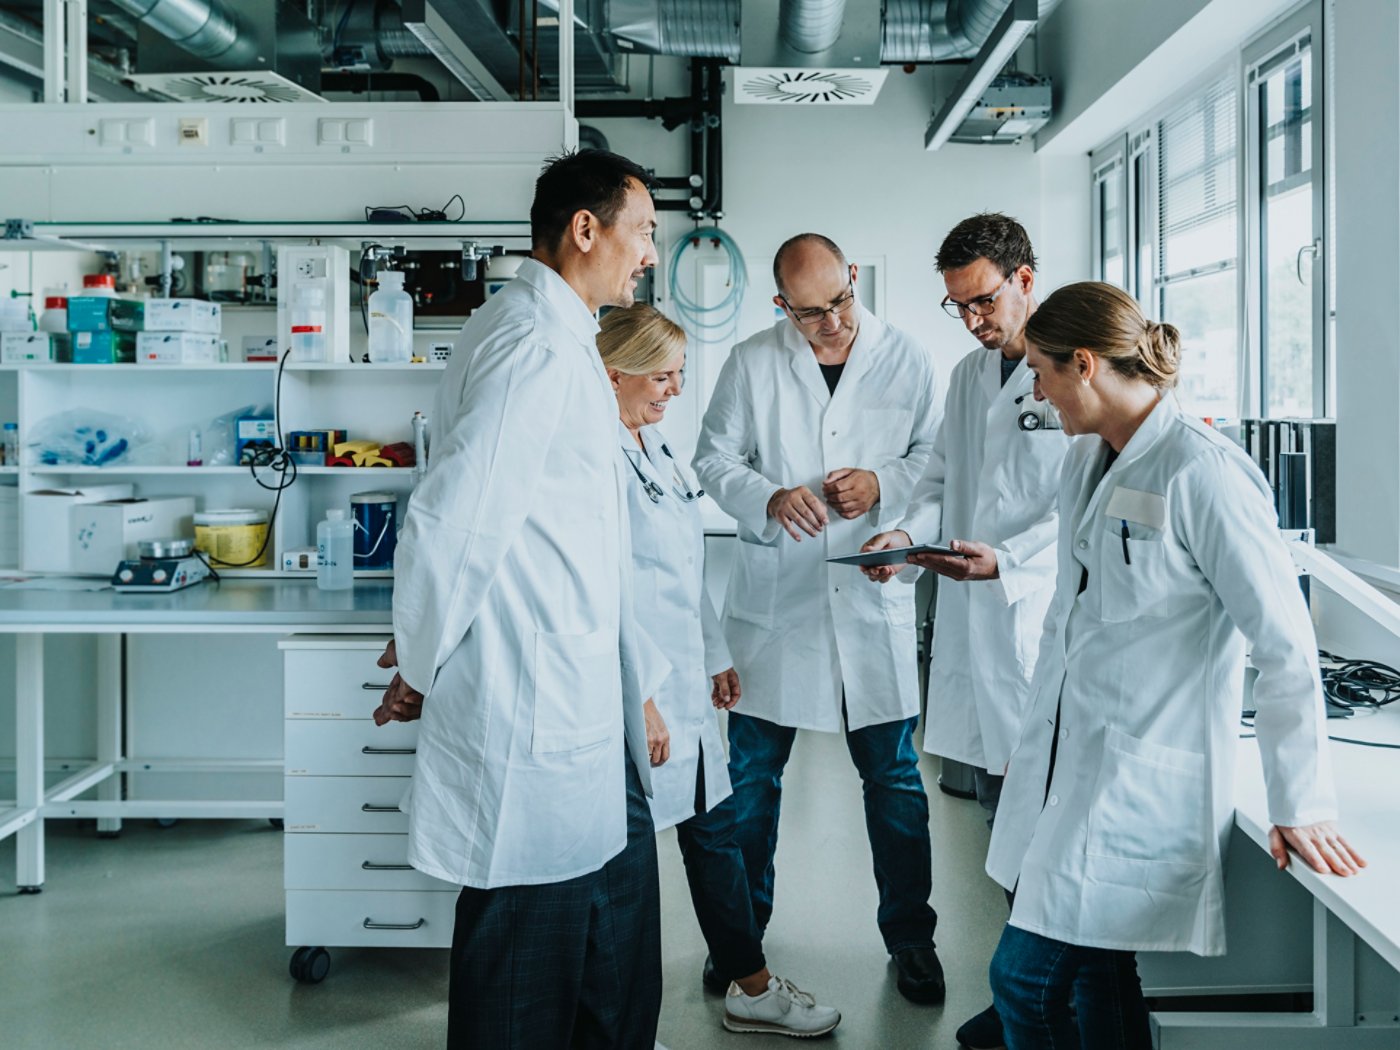 Scientists and doctors with digital tablet, standing in laboratory, NRW, Germany